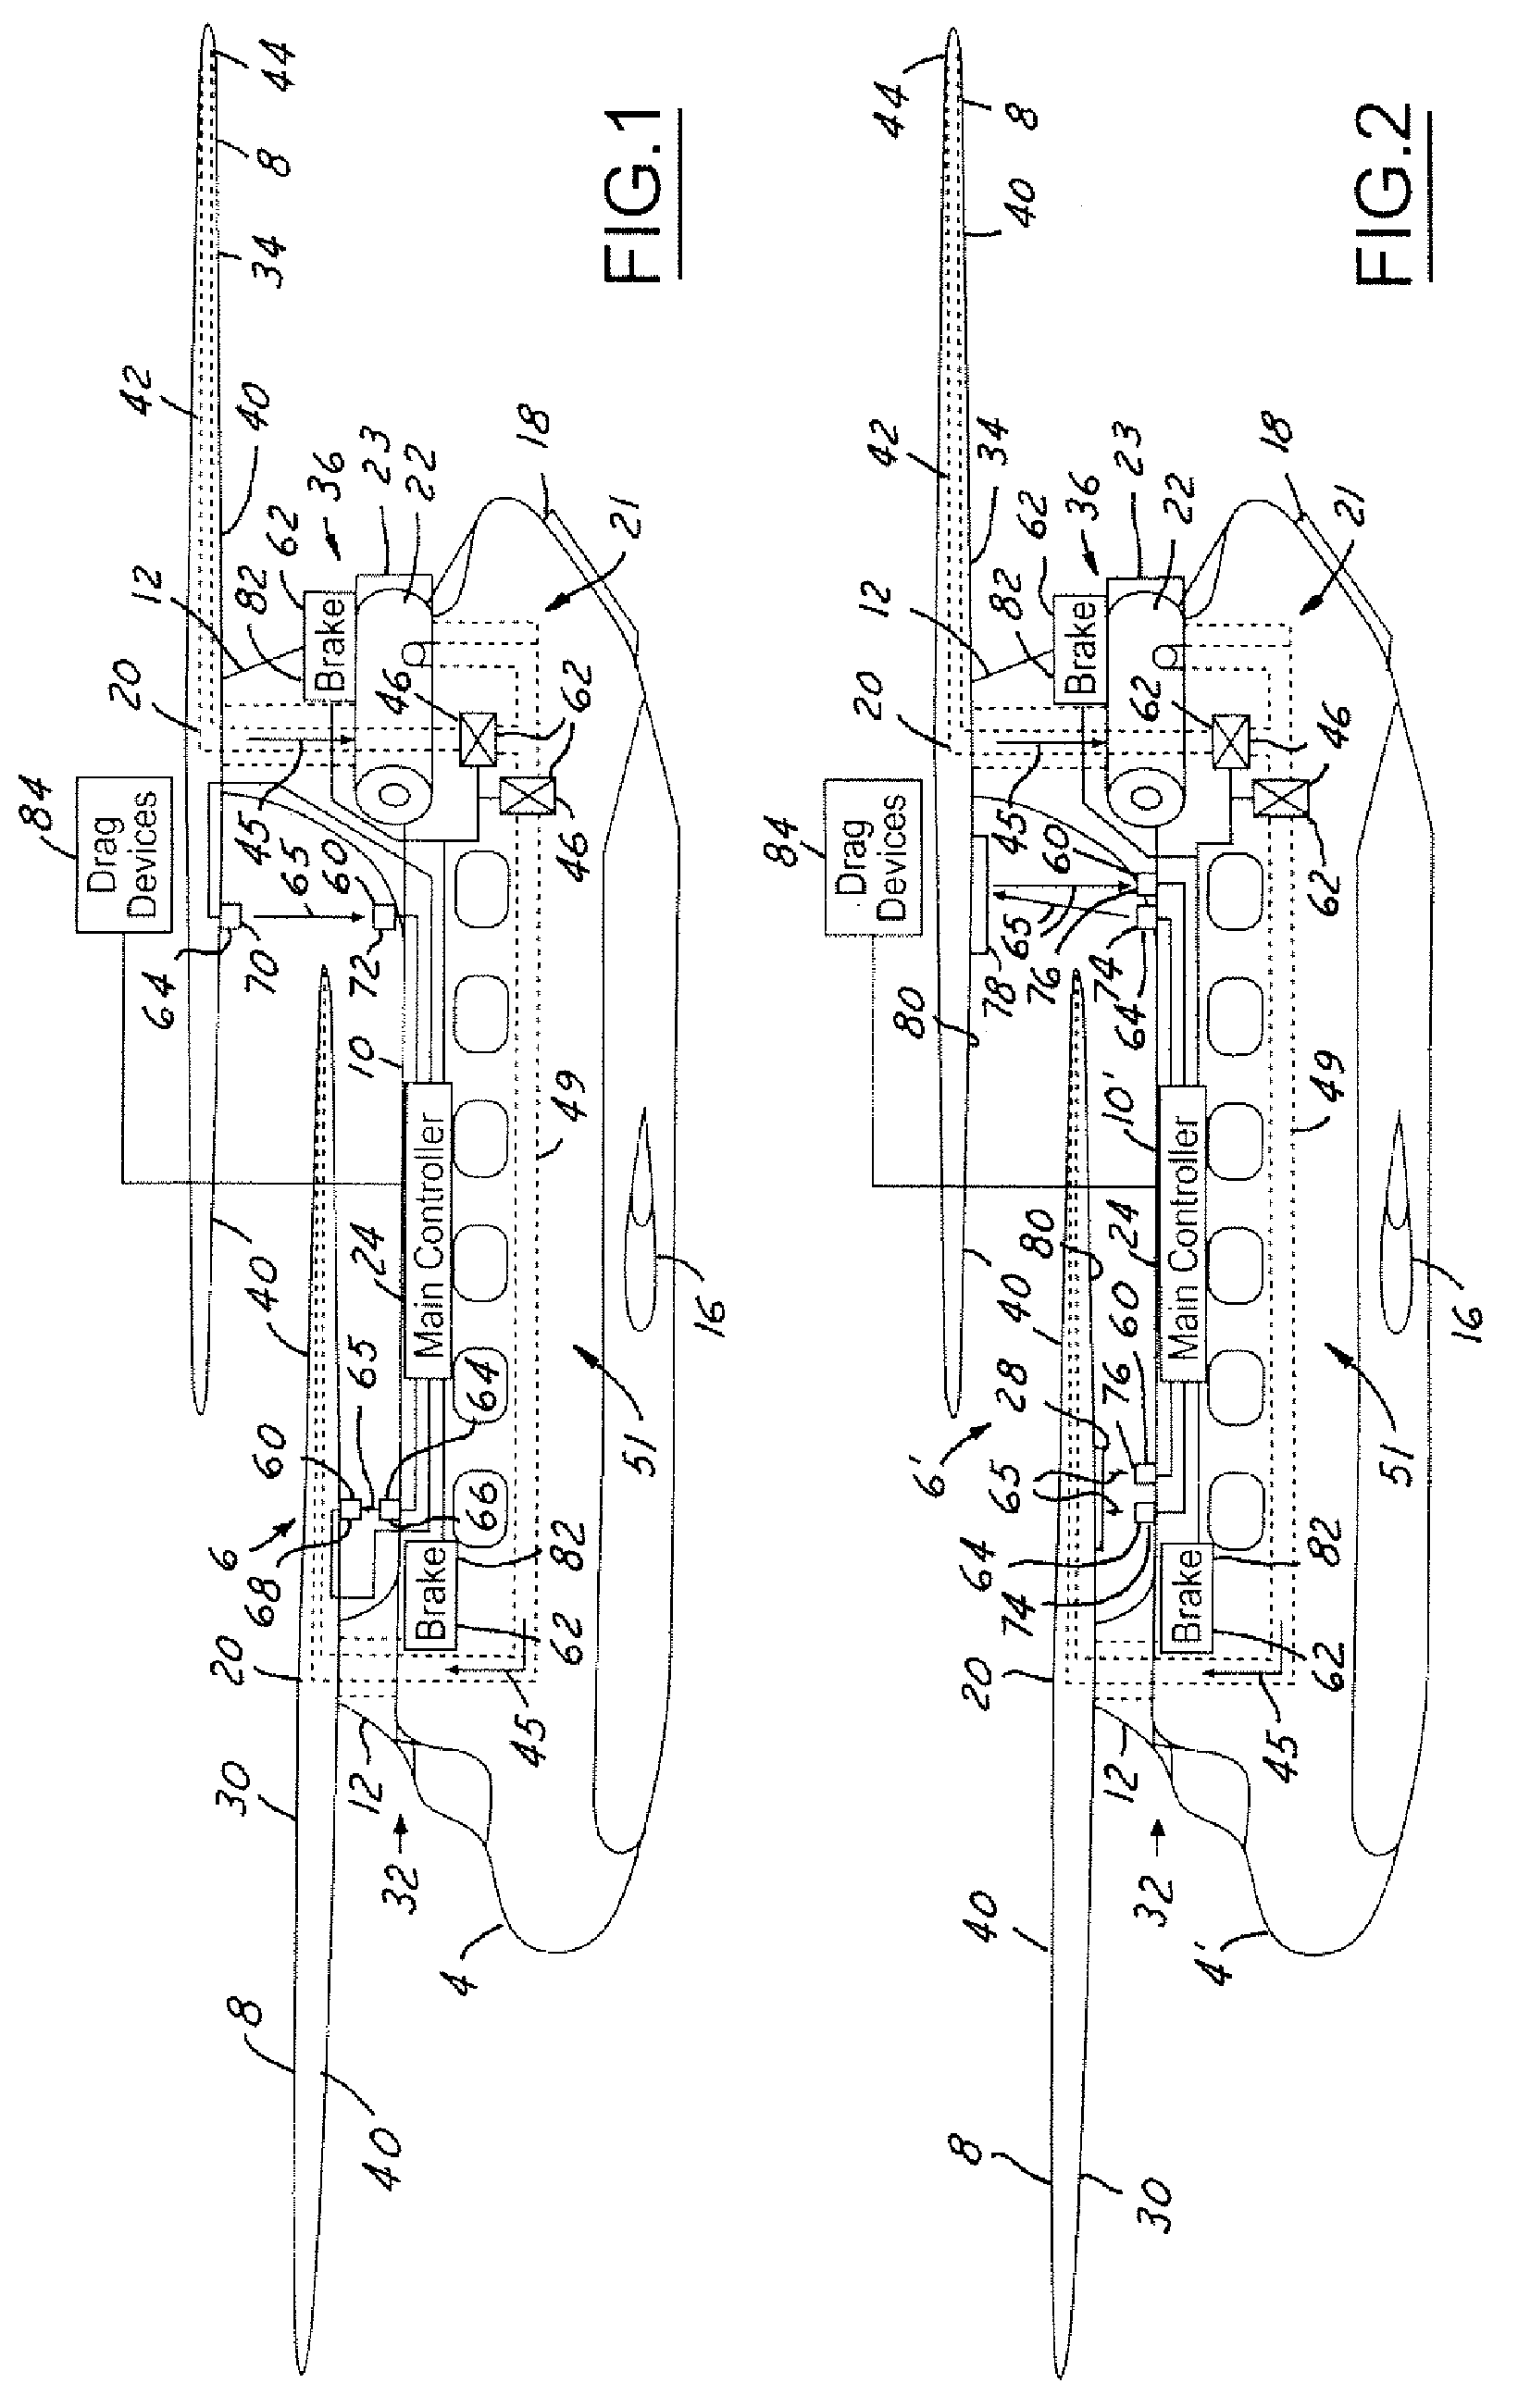 Tandem rotor wing rotational position control system